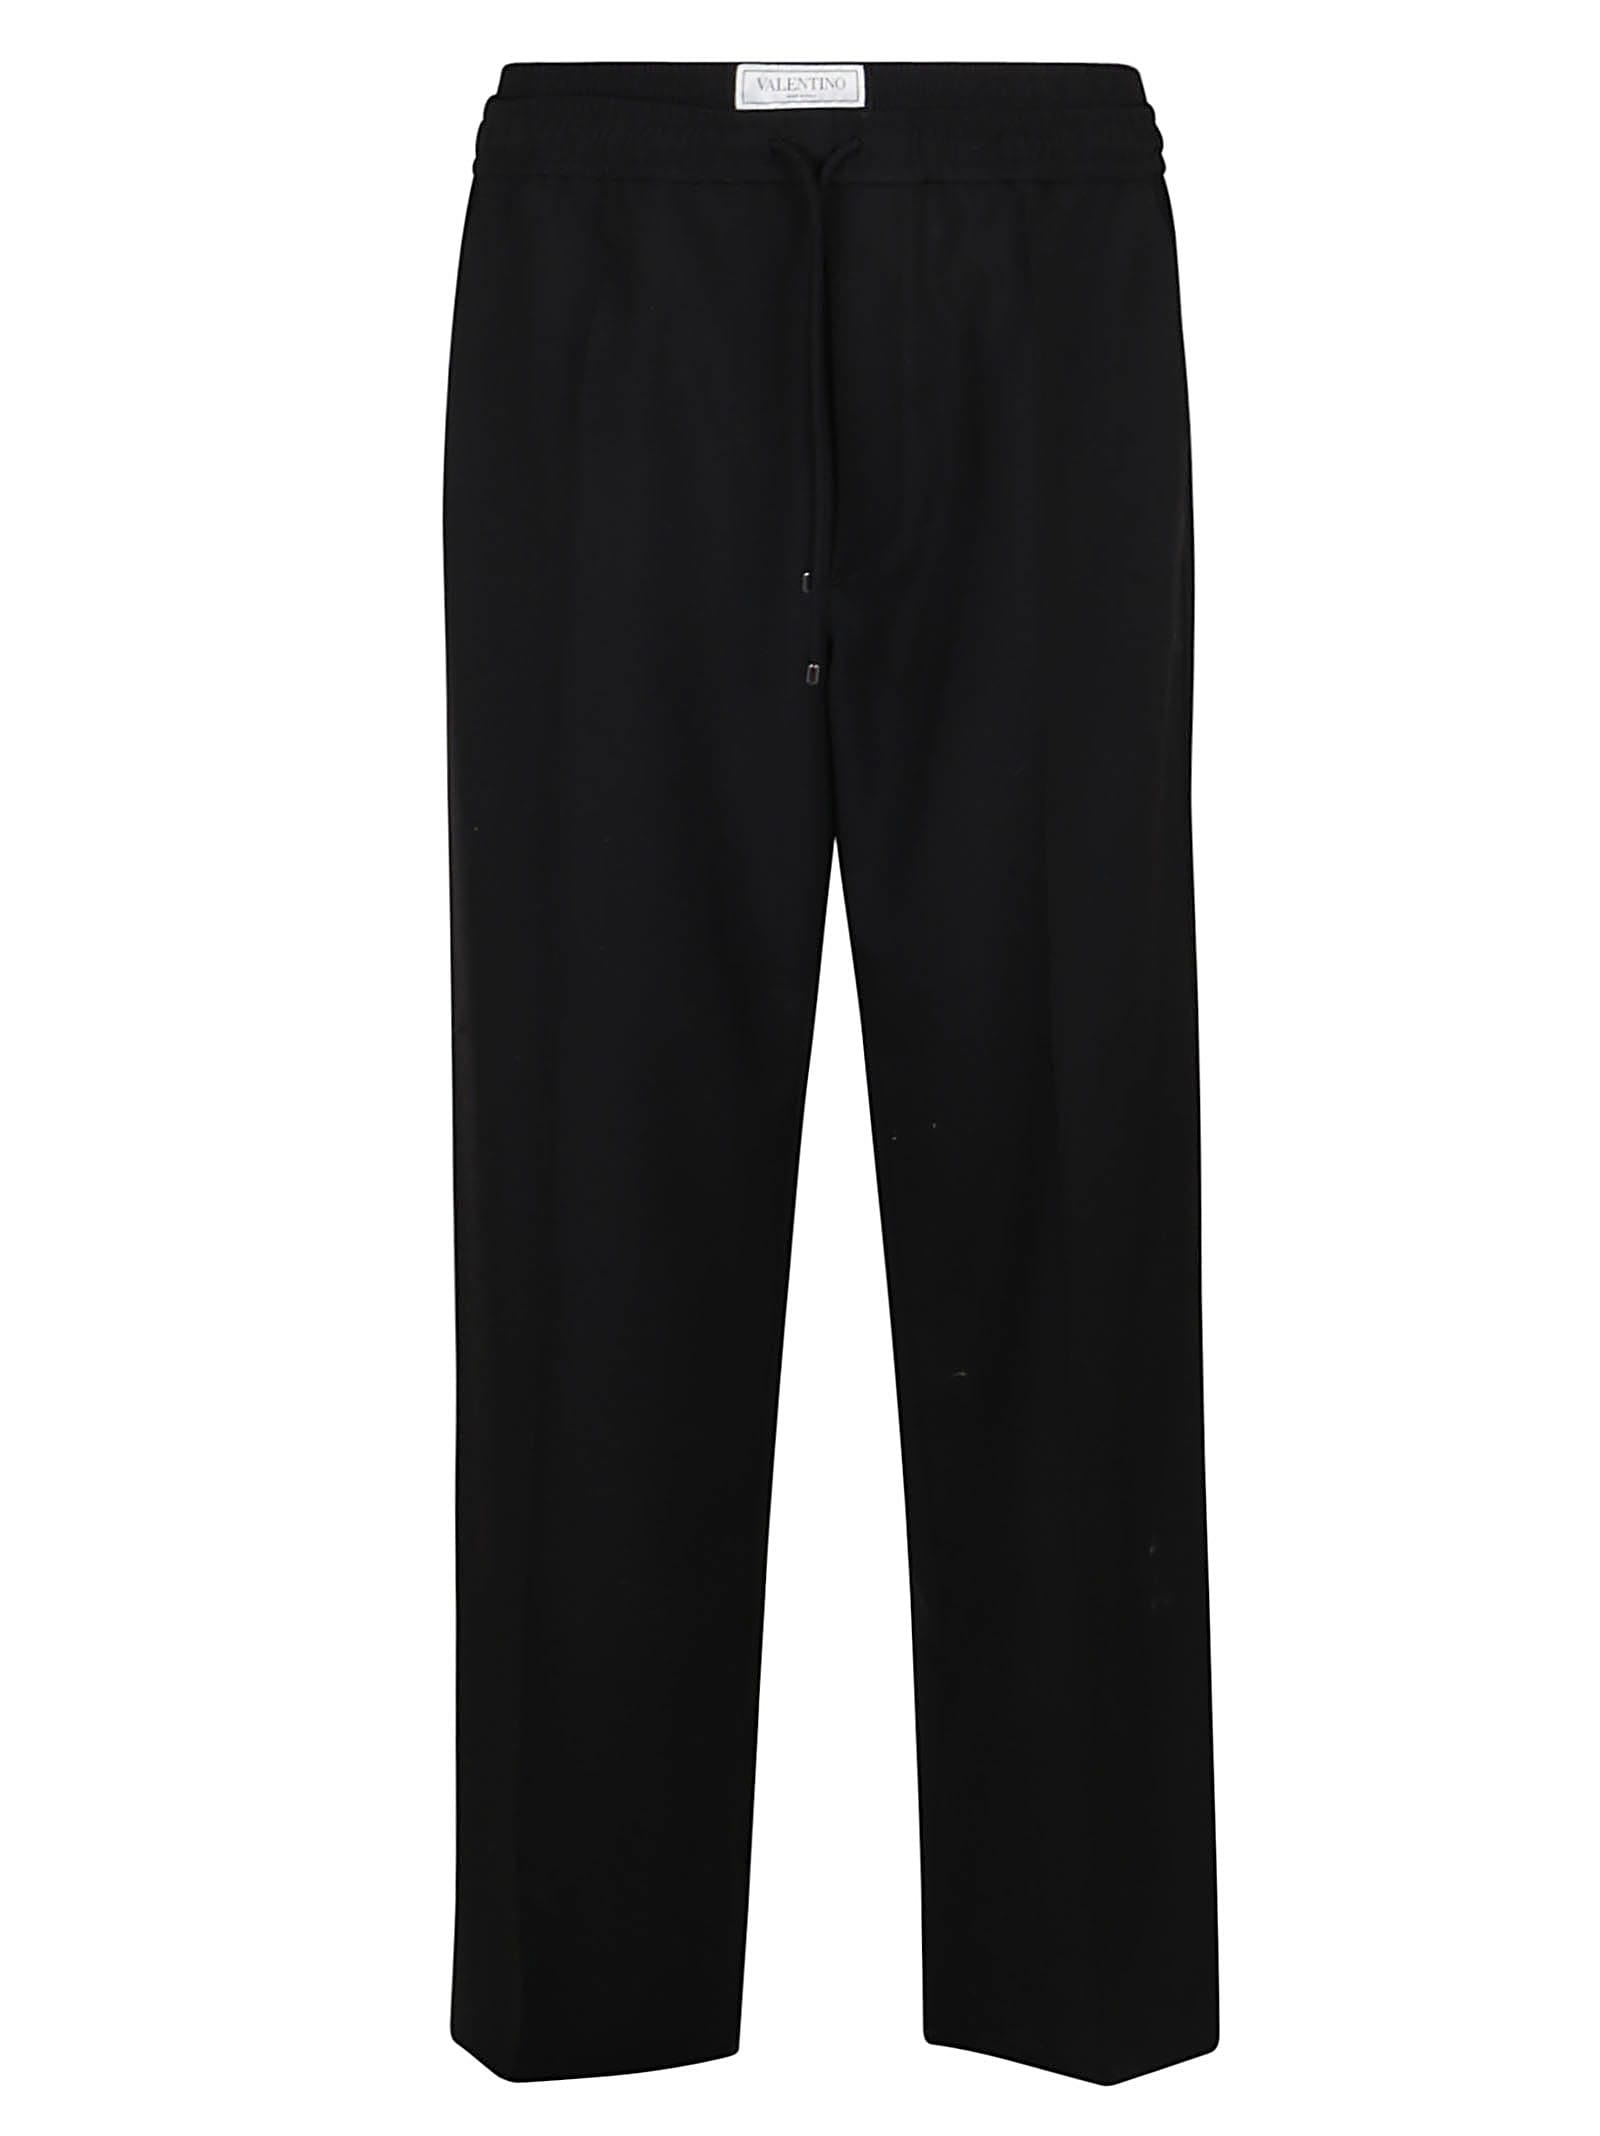 Purple Drawstring Ames Trousers in Pure S110s Wool  SUITSUPPLY US